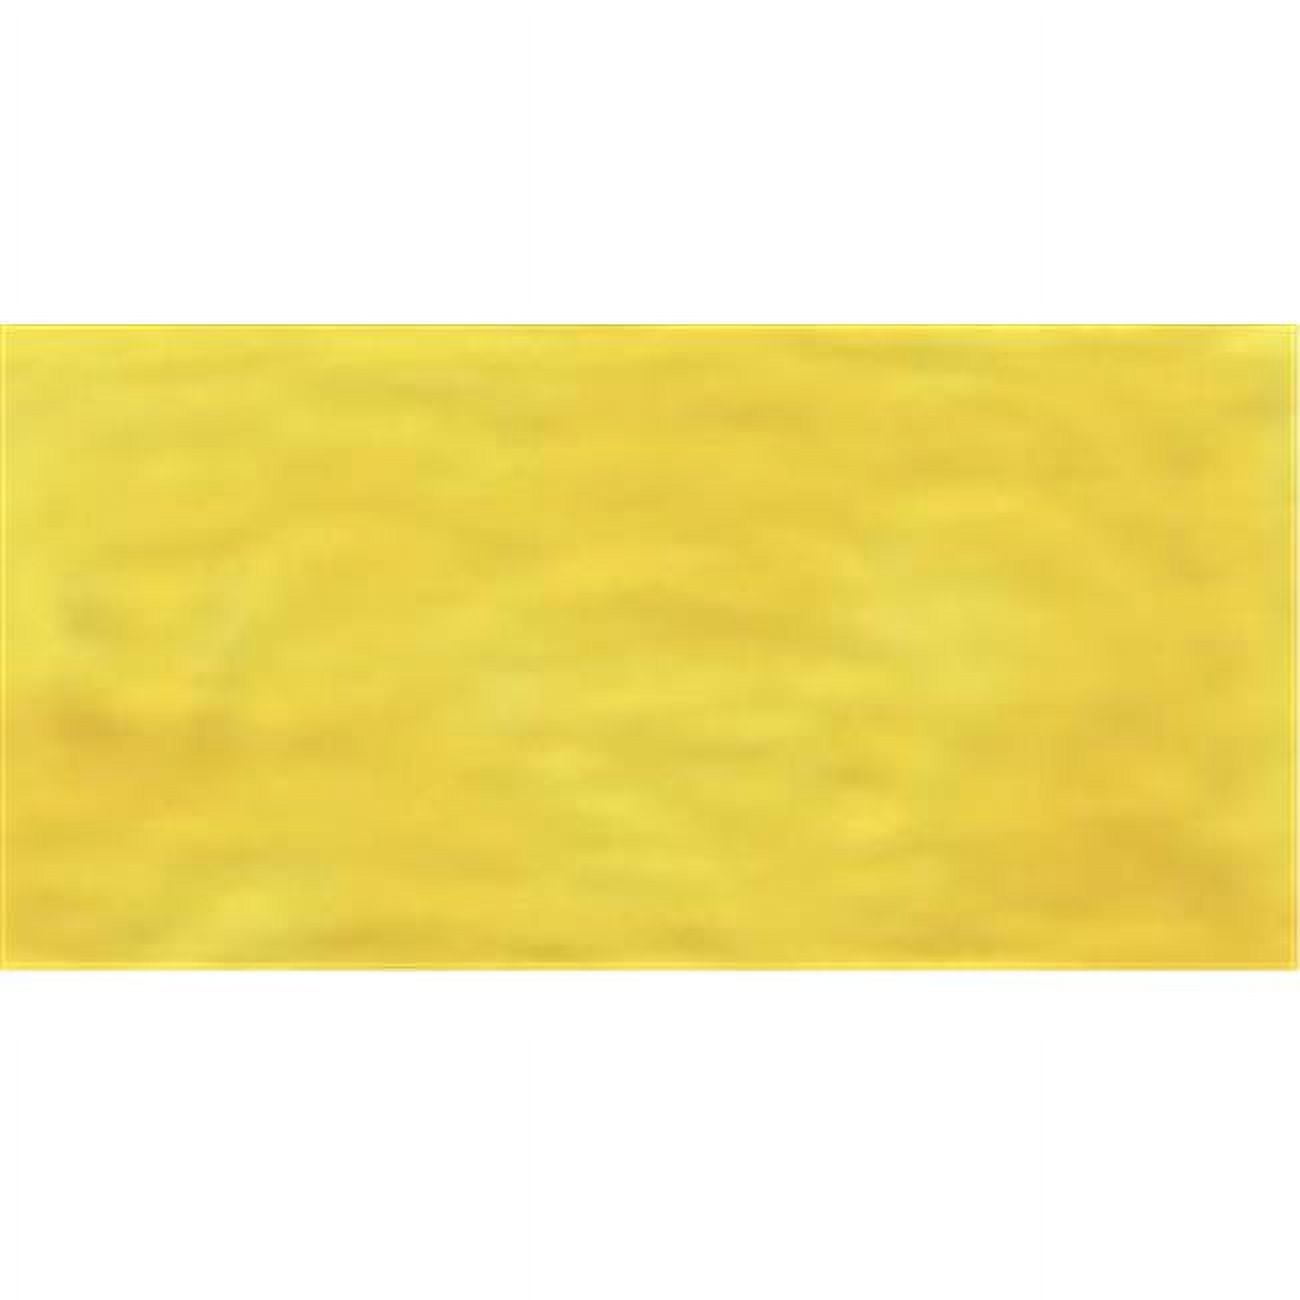 Plaid GALLERY GLASS 59ML Stained Glass Effect Paint Harvest Yellow